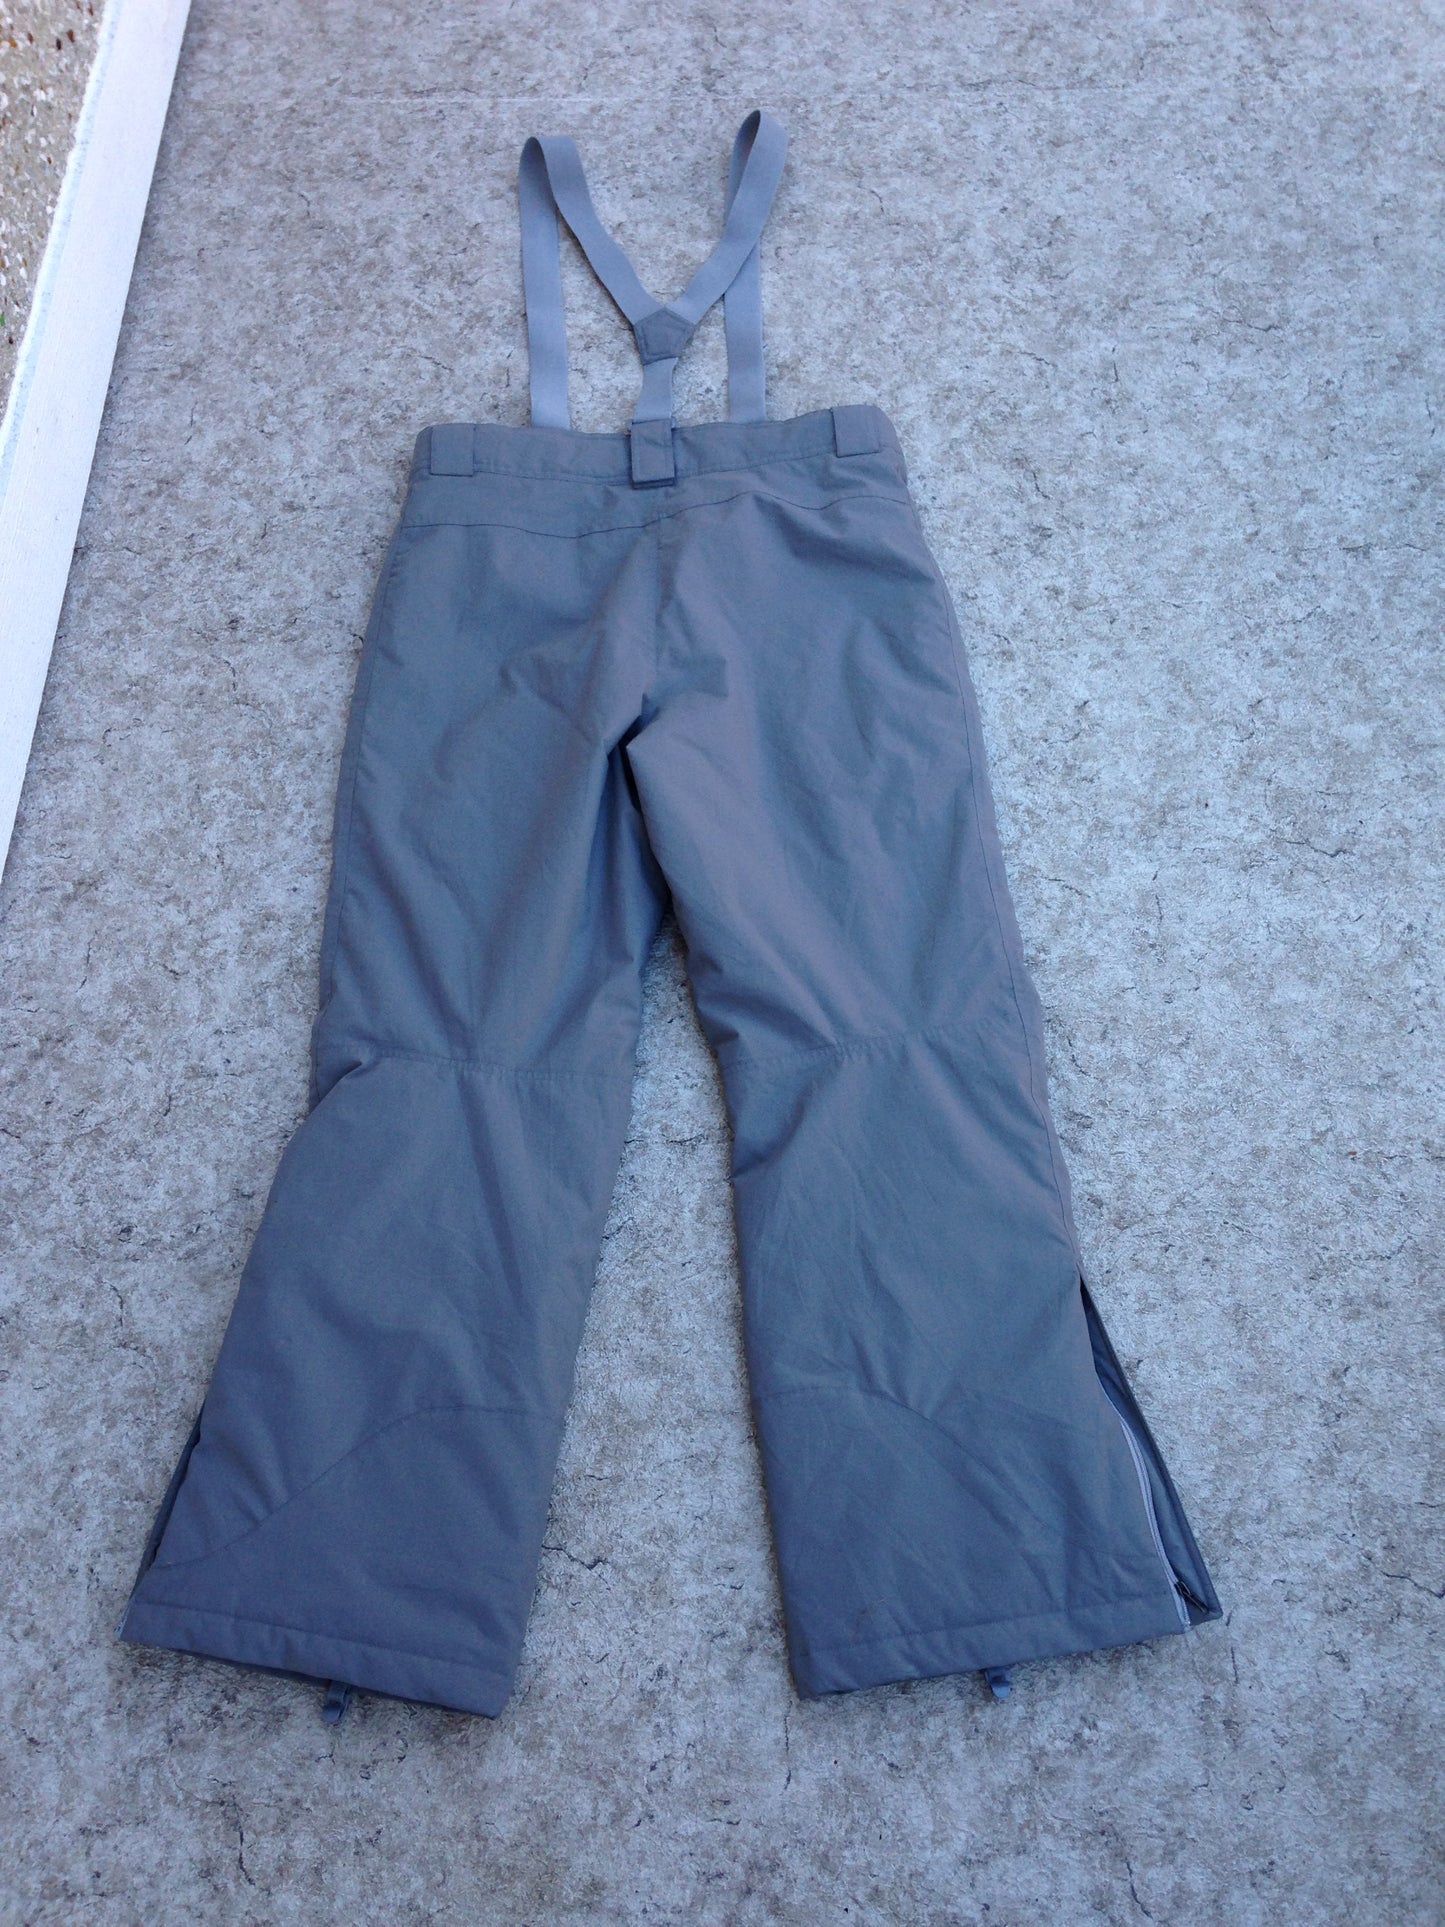 Snow Pants Men's Size Large Mole Snowboarding With Removeable Straps Adjustable Waist Grey New Demo Model